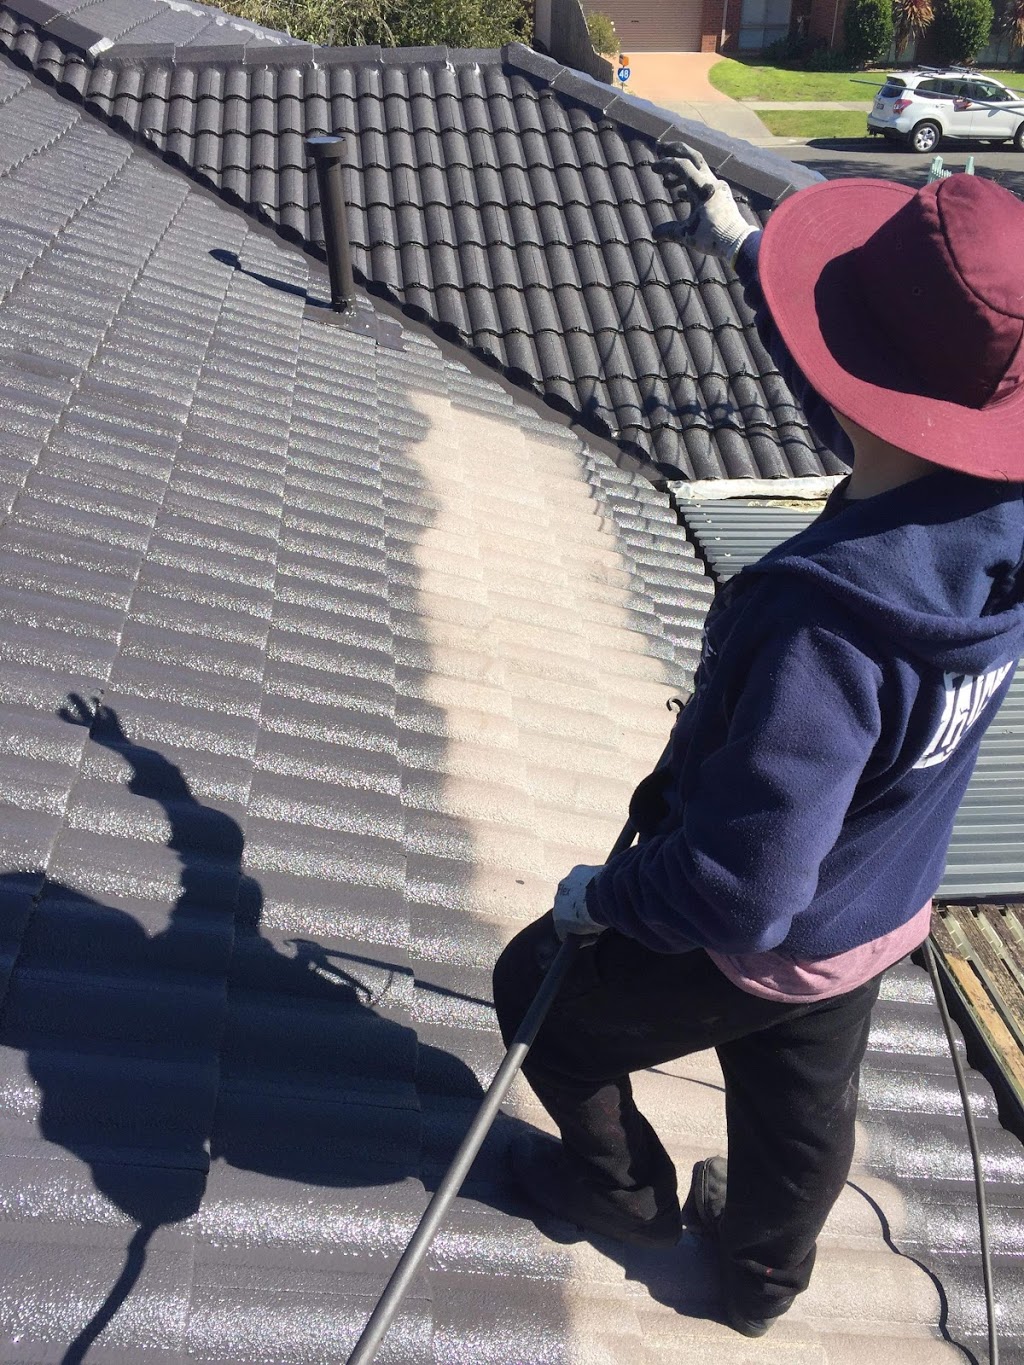 All Seasons Recover Roof Restoration | roofing contractor | 2 Alderney Rd, Springvale South VIC 3172, Australia | 0452162256 OR +61 452 162 256